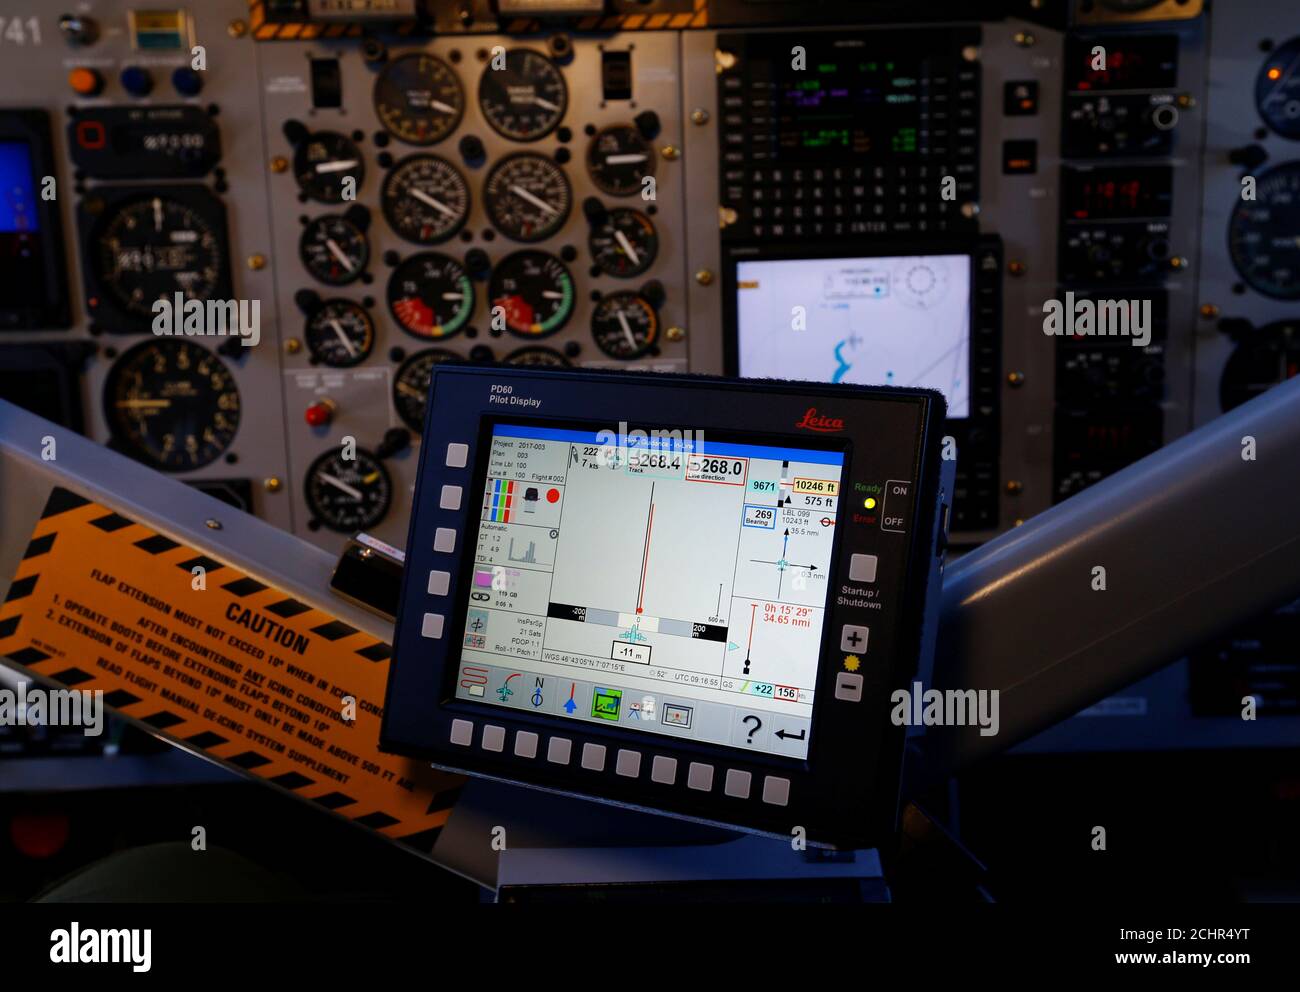 The alignment position of the Swiss Air Force Twin Otter aircraft is seen  on a control screen during a land-surveying presentation flight of the Swiss  Federal Office of Topography (swisstopo) to present